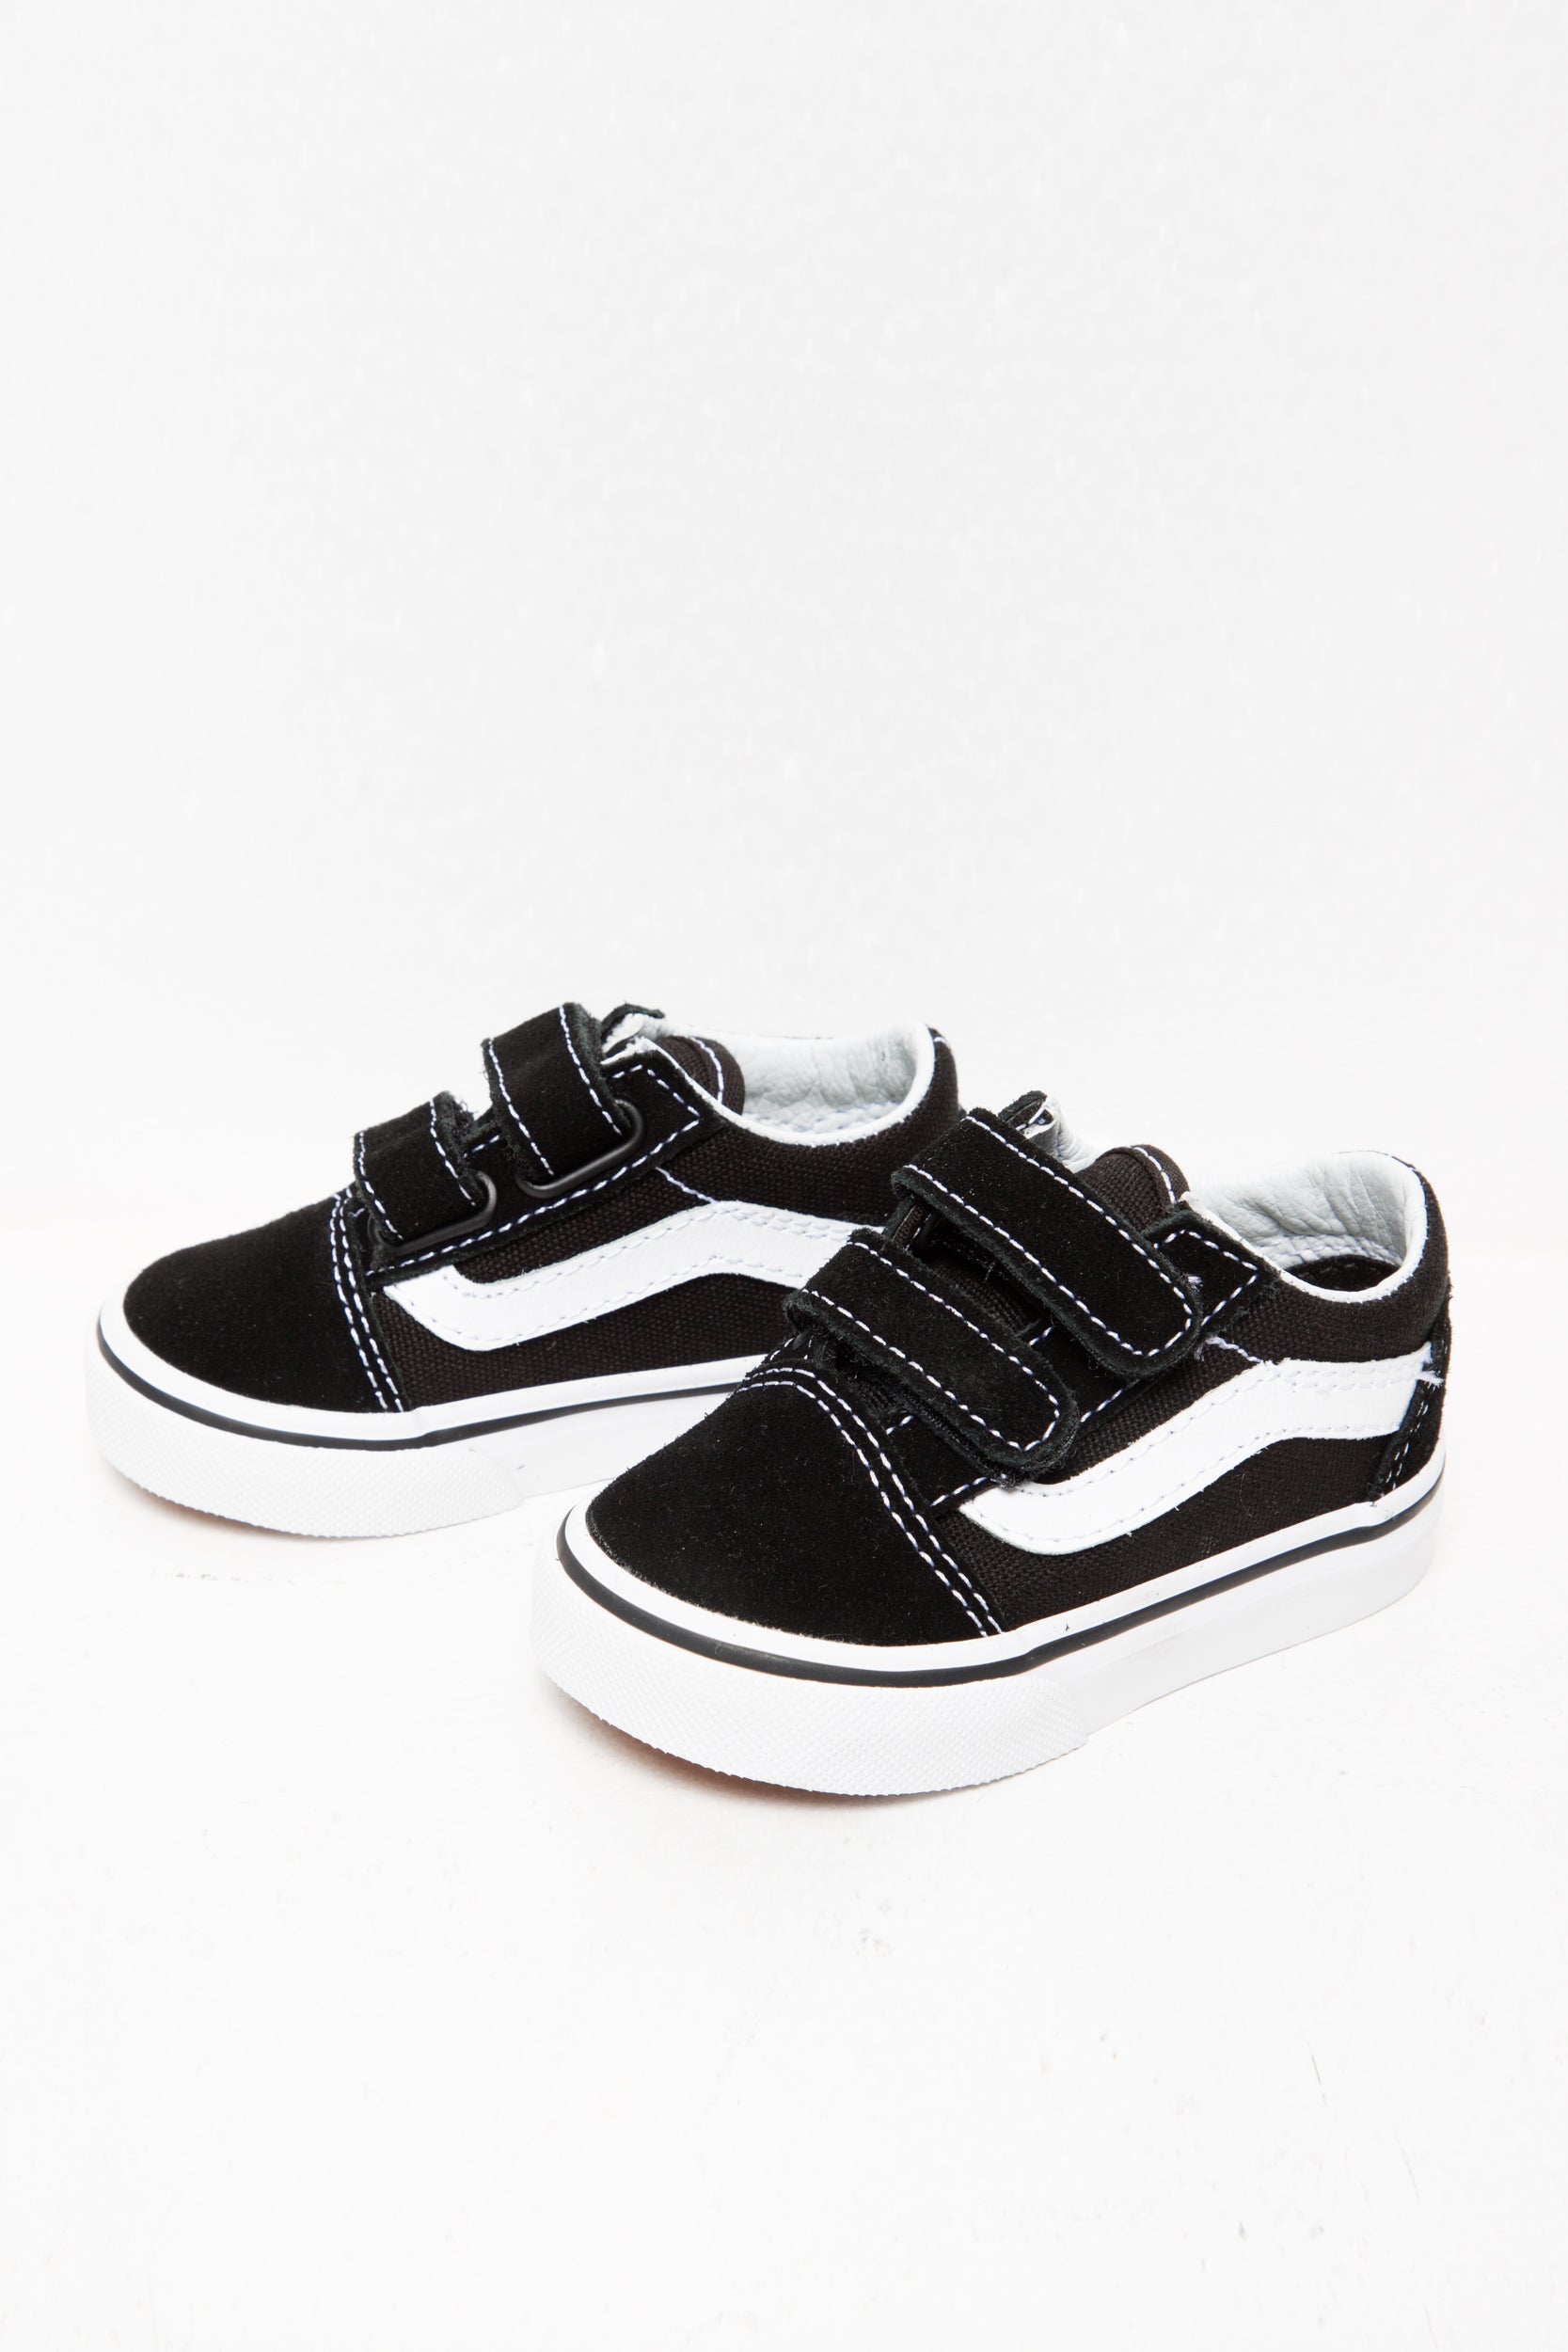 afterpay vans shoes